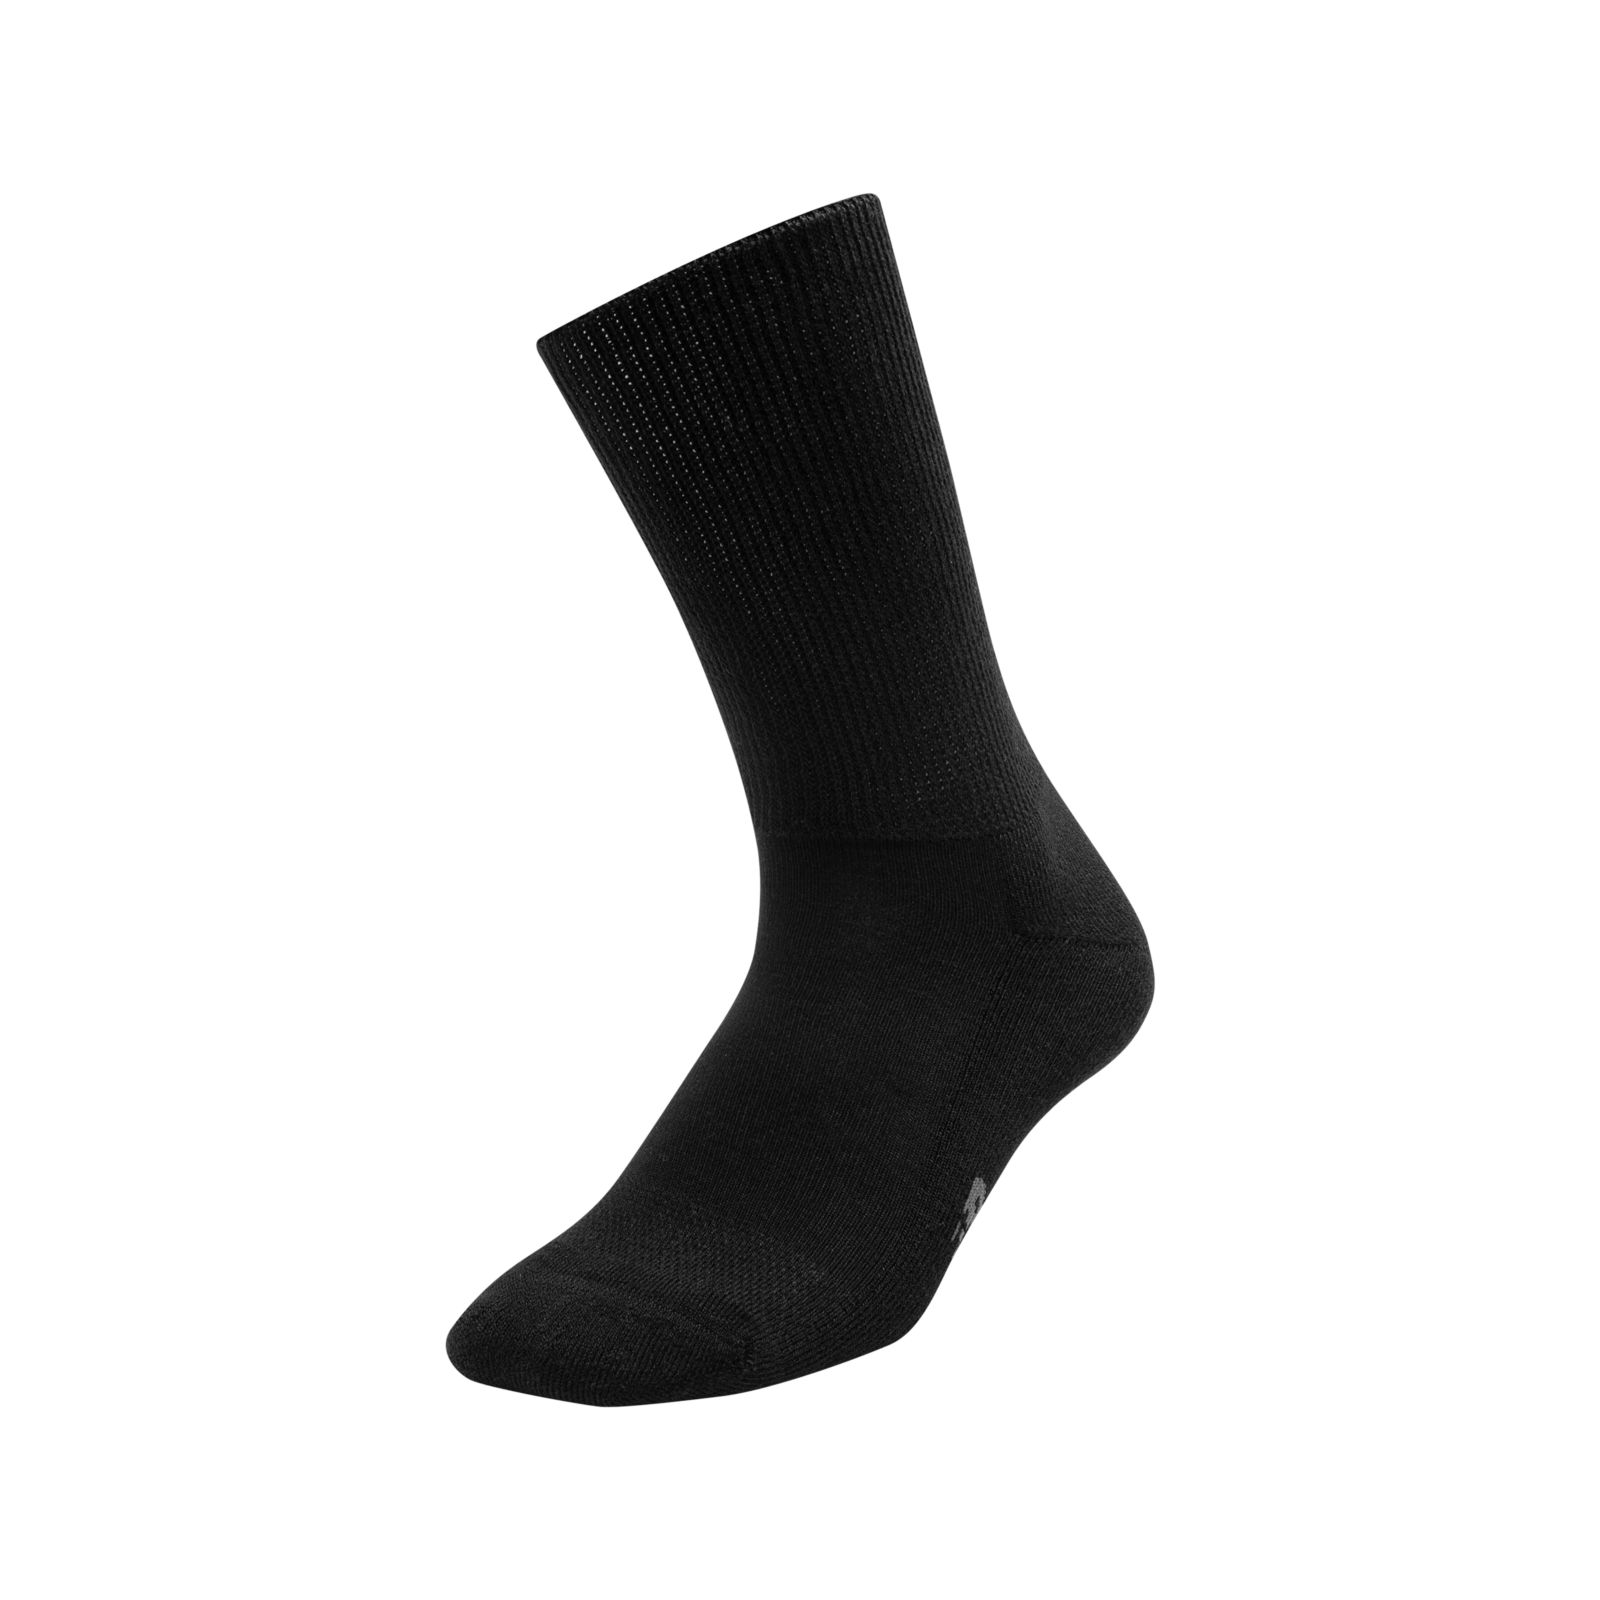 Men's Under Armour Socks: Step Up Your Active Style With UA Sports Socks